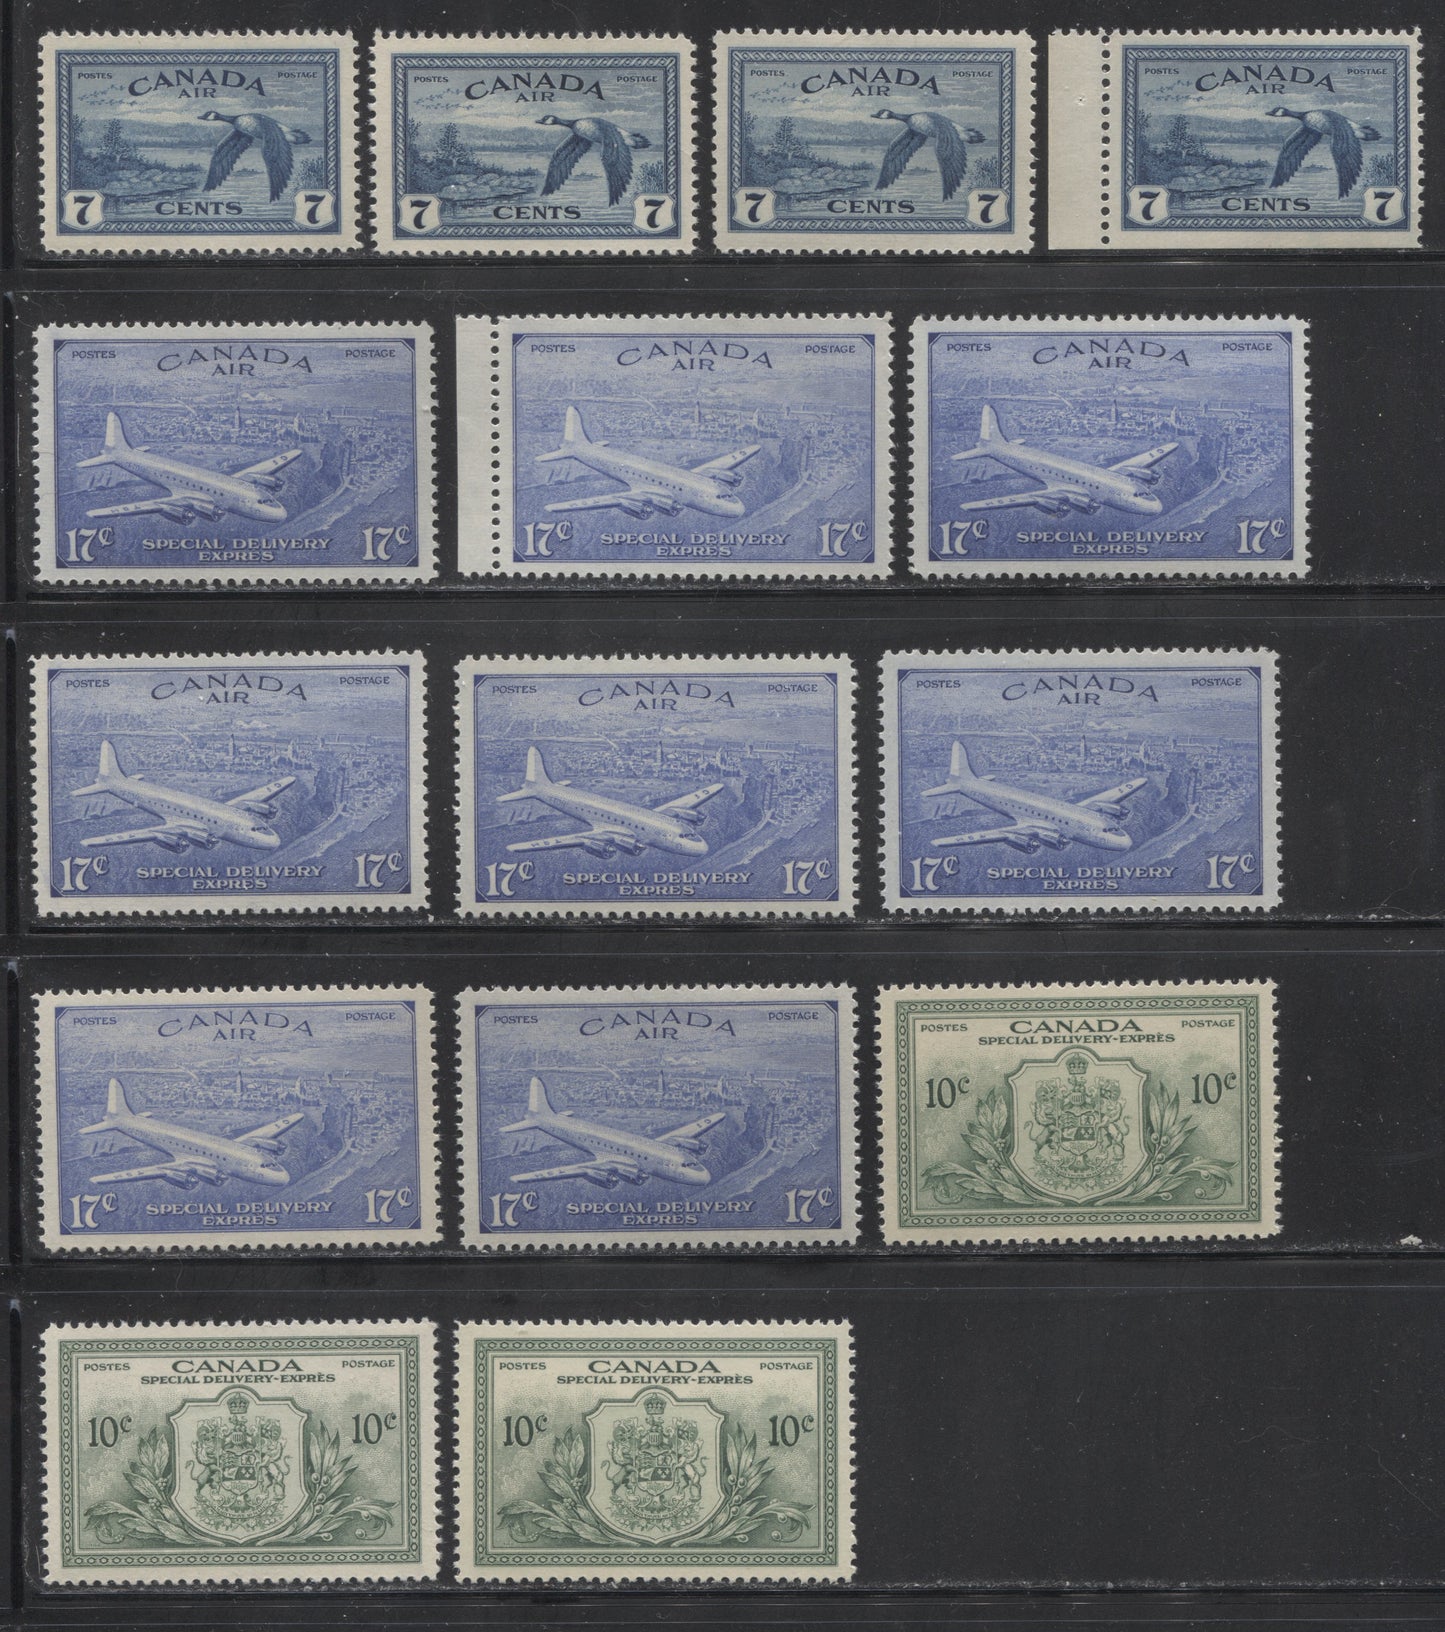 Canada #C9, CE3-4, E11 1946-1950 Peace Issue - Specialized Lot of 15 VF NH Airmail and Special Delivery Stamps Brixton Chrome 